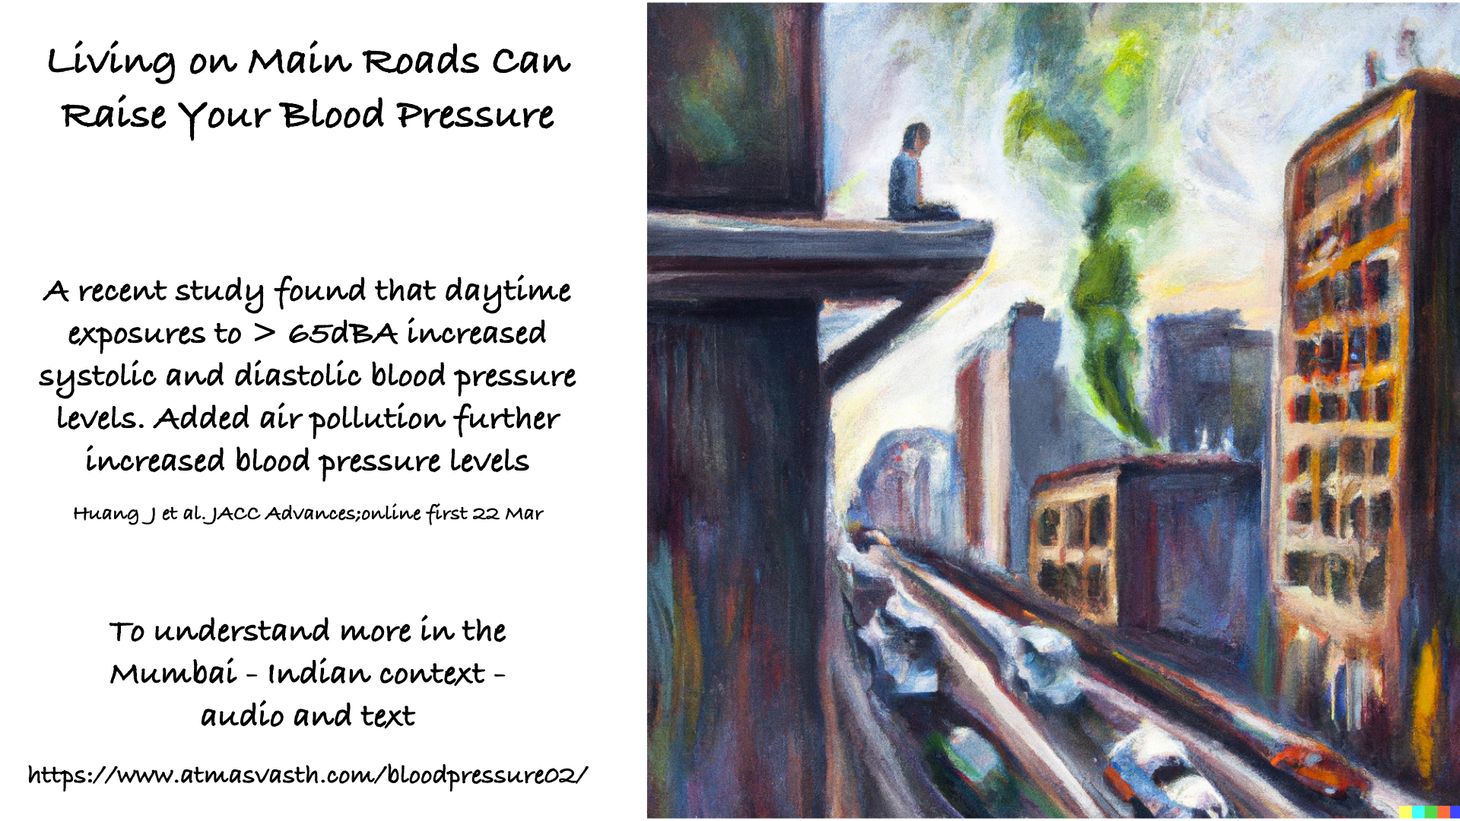 Living on Main Roads can Raise Your Blood Pressure